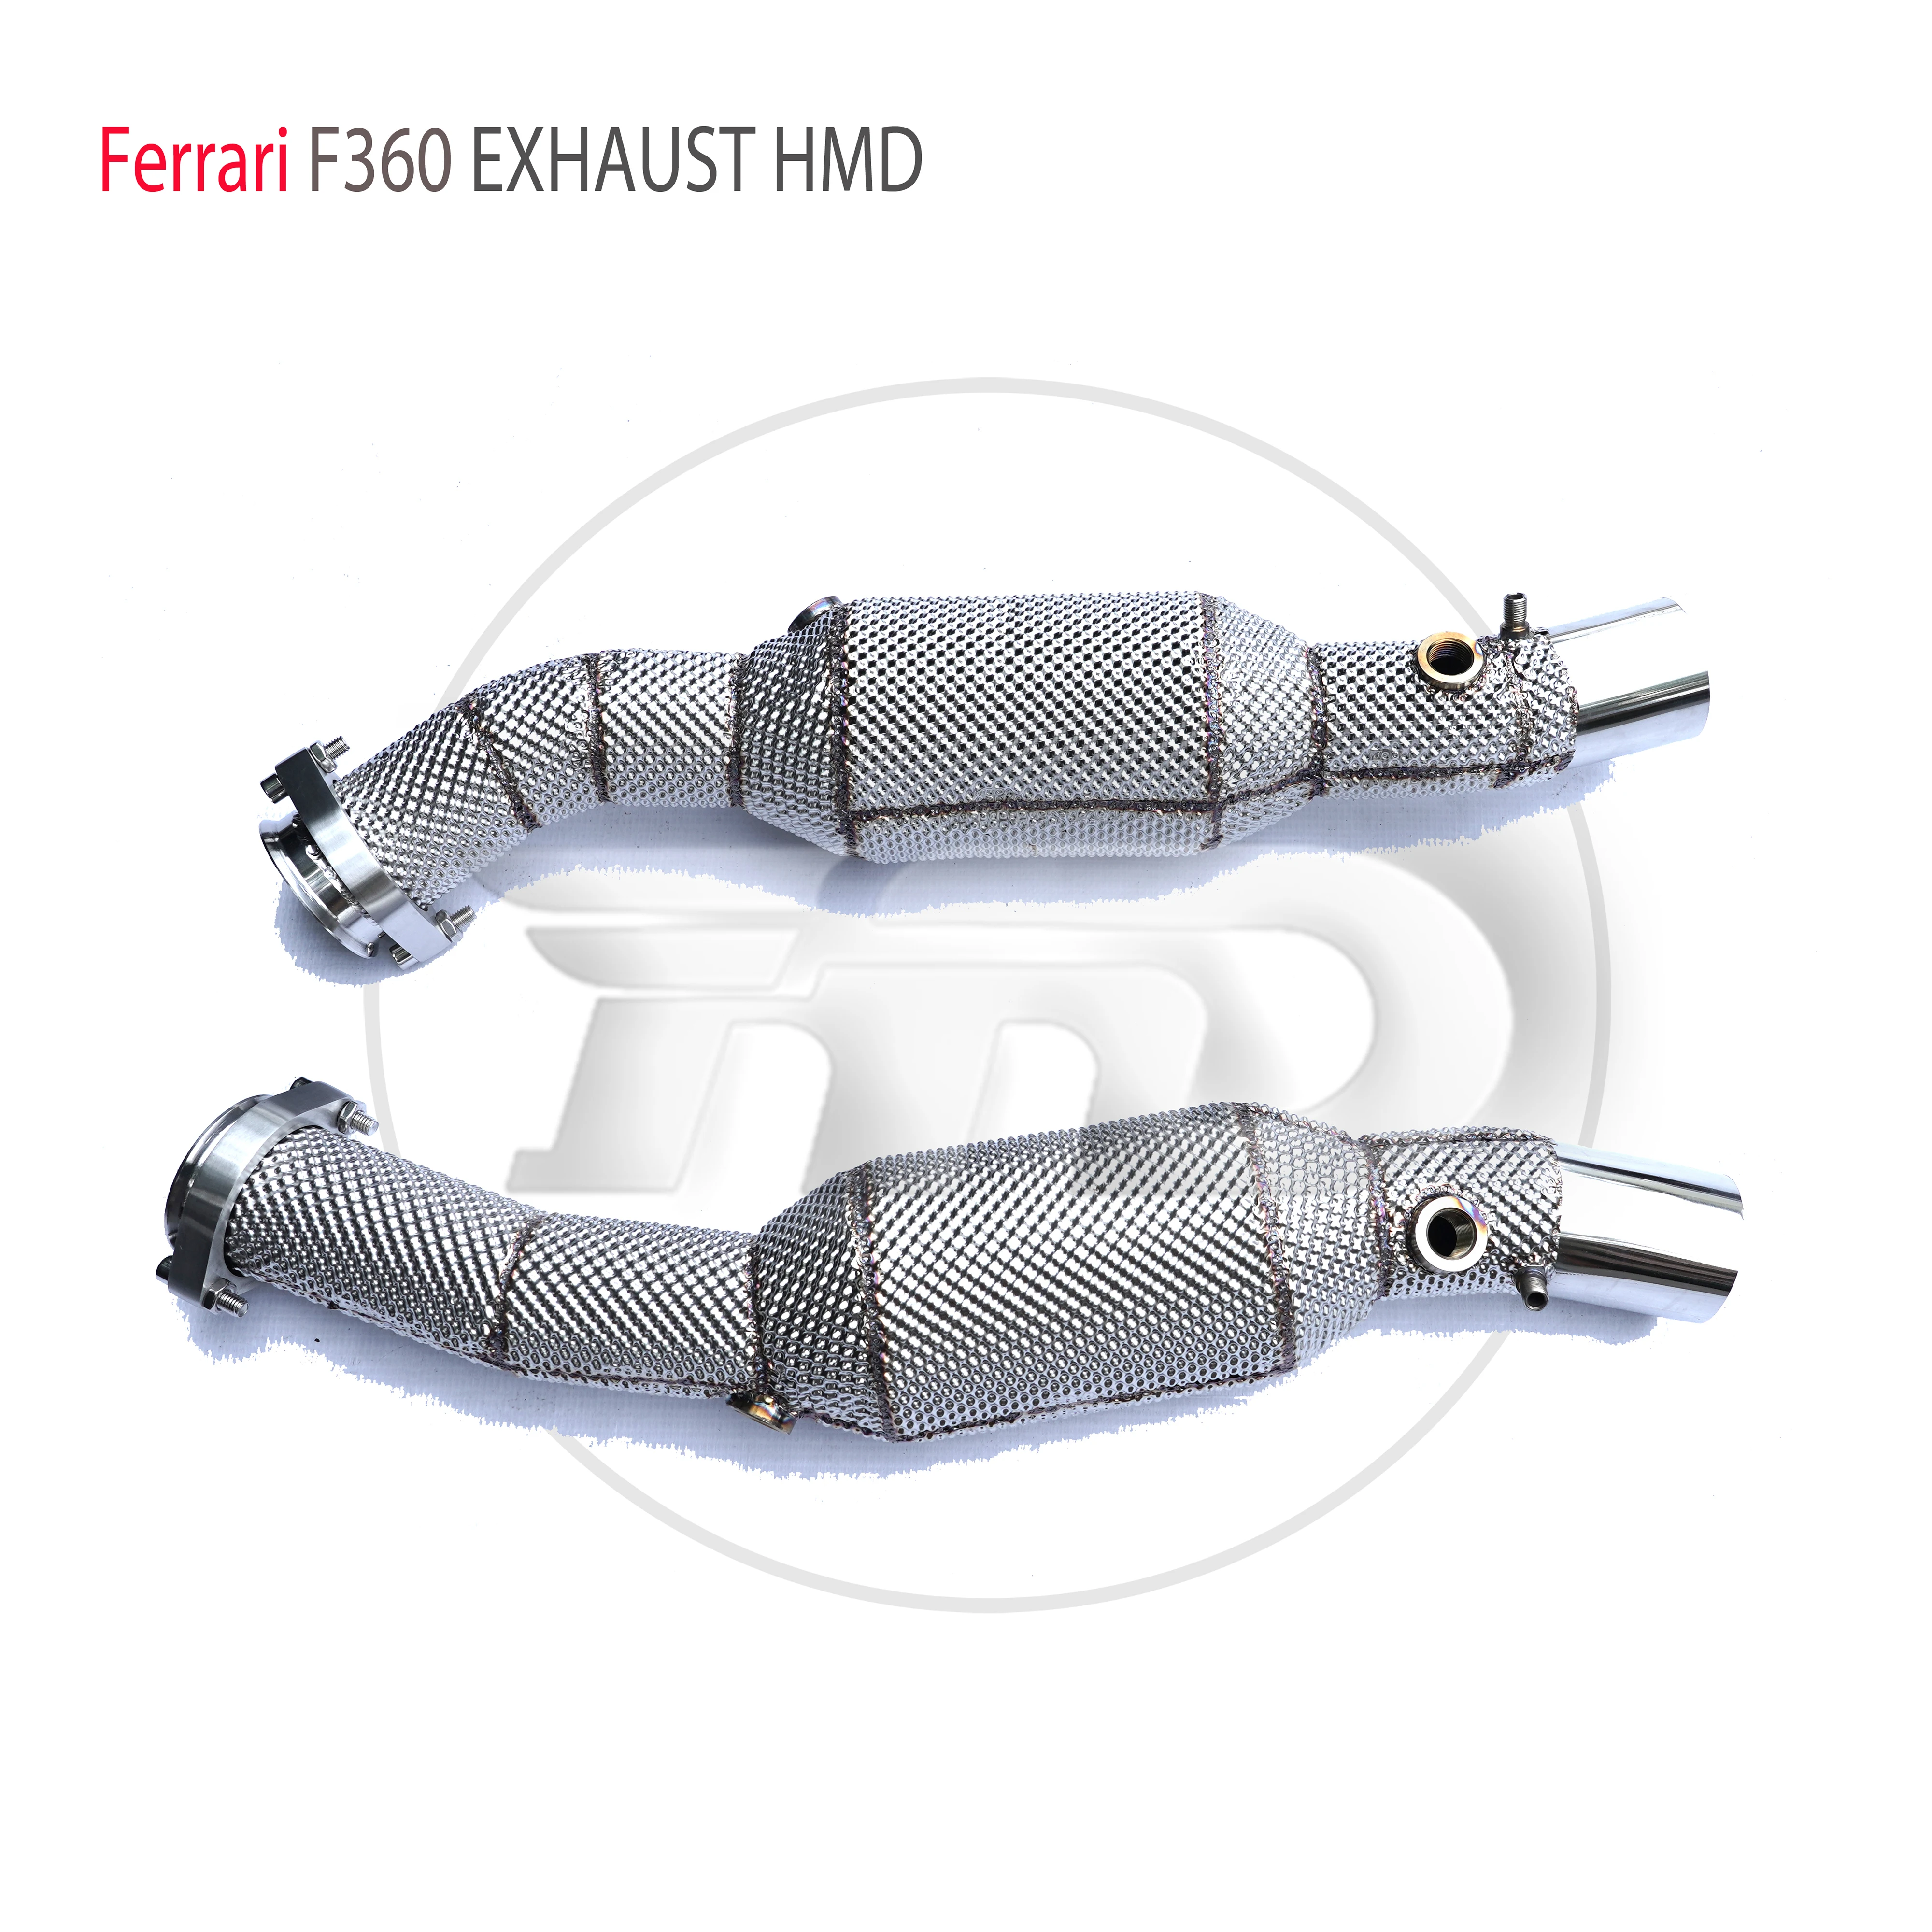 

HMD Exhaust System High Flow Performance Downpipe For Ferrari F360 Auto Modification Header With Catalyst